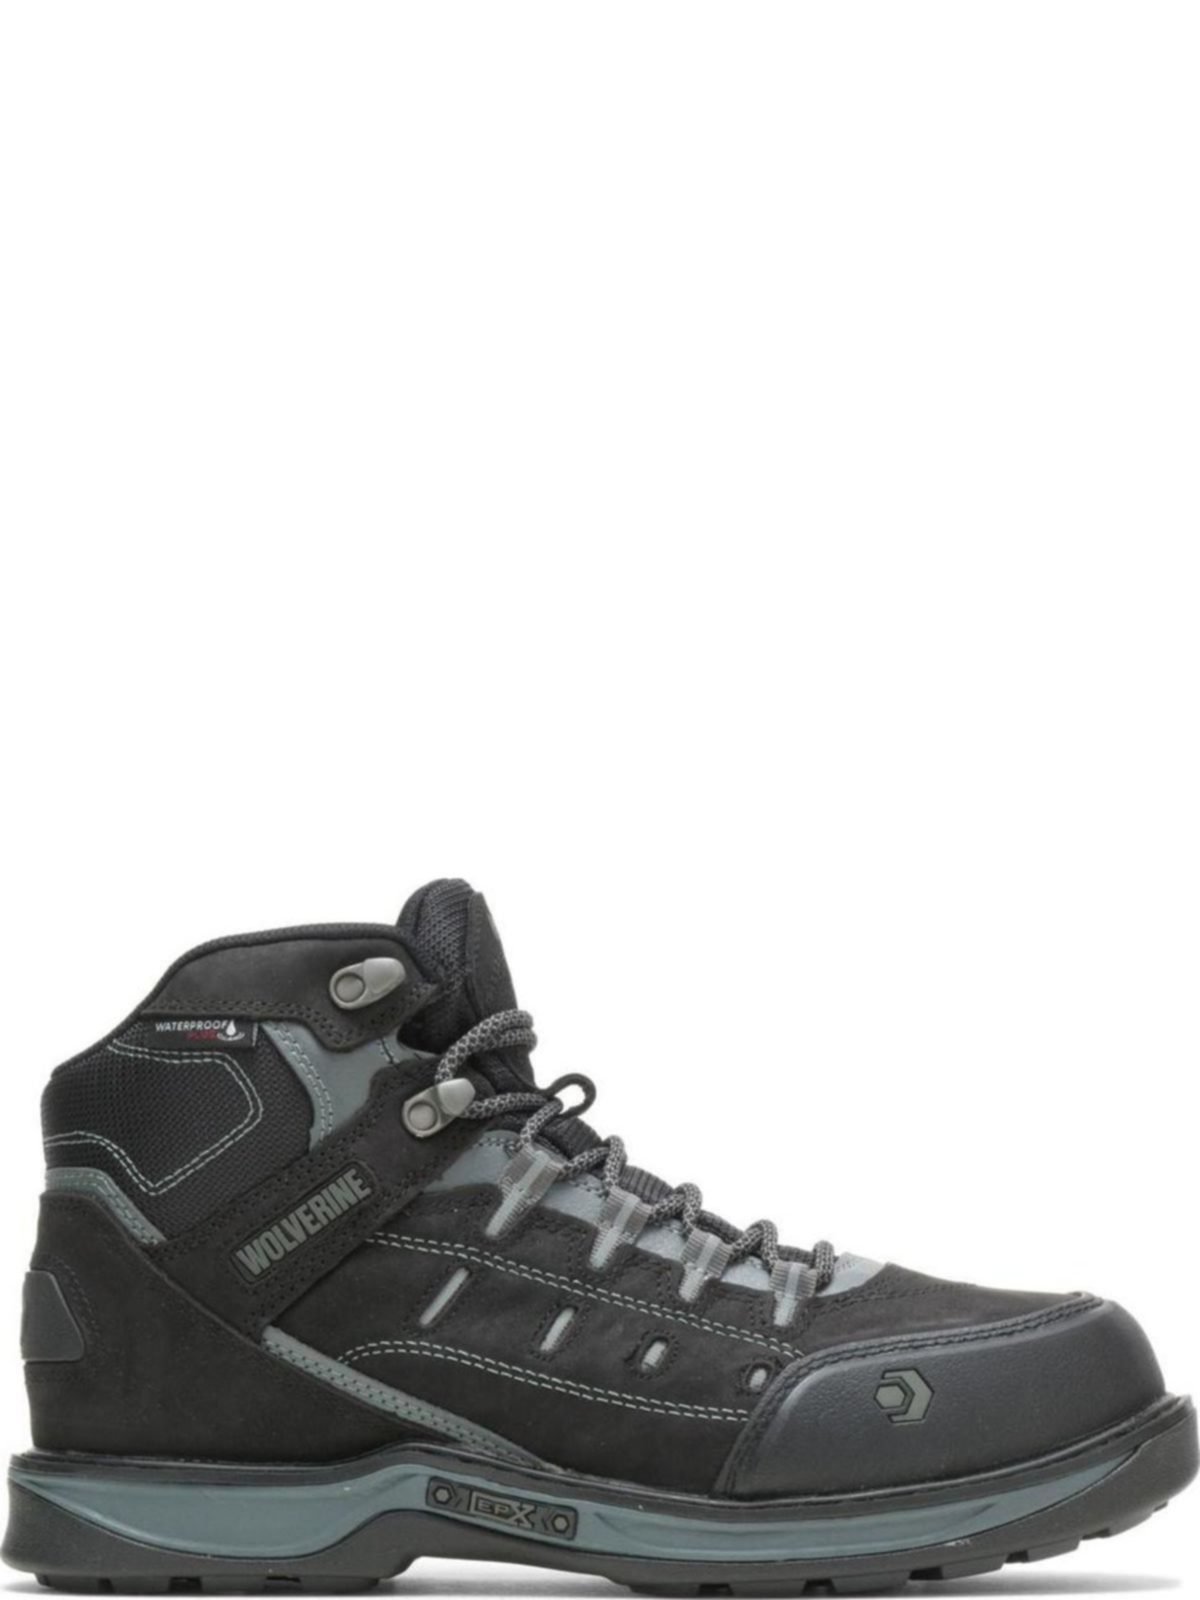 Shop Wolverine Mens Edge LX EPX Waterproof CarbonMax Work Boot W10553 ...